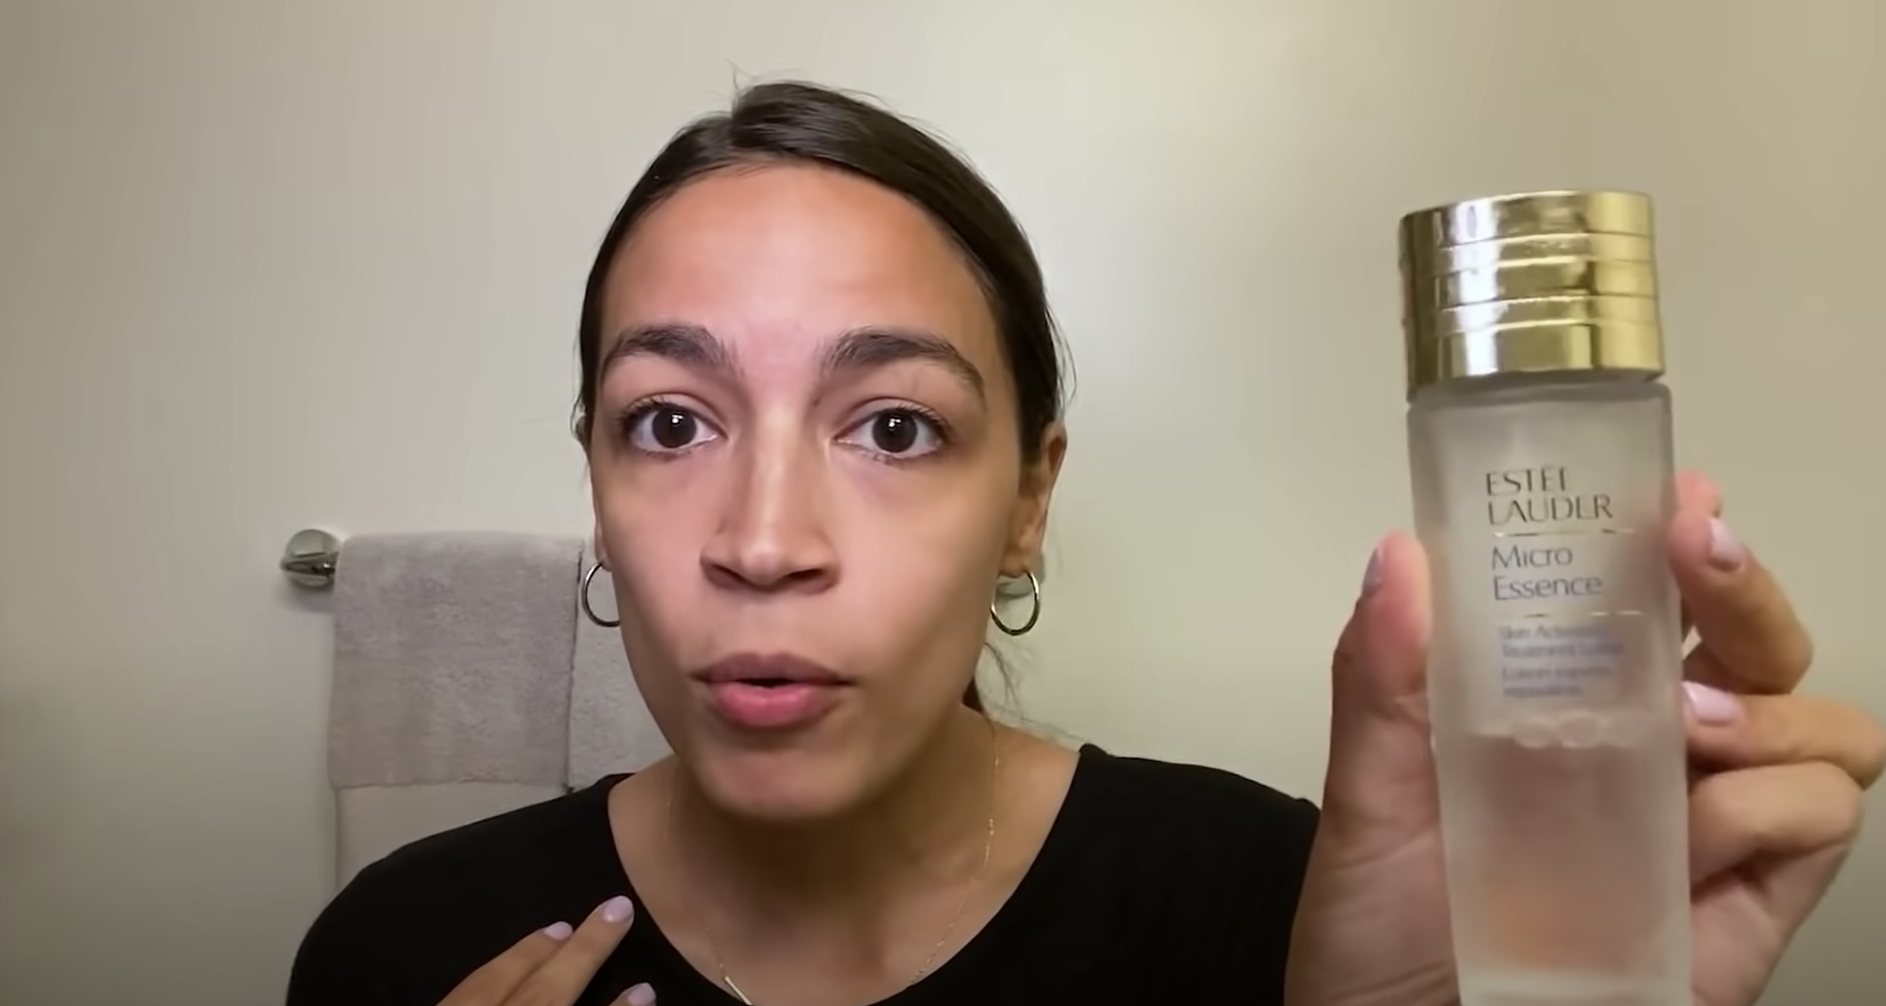 Alexandria Ocasio-Cortez talking to the camera and holding up a bottle of toner.